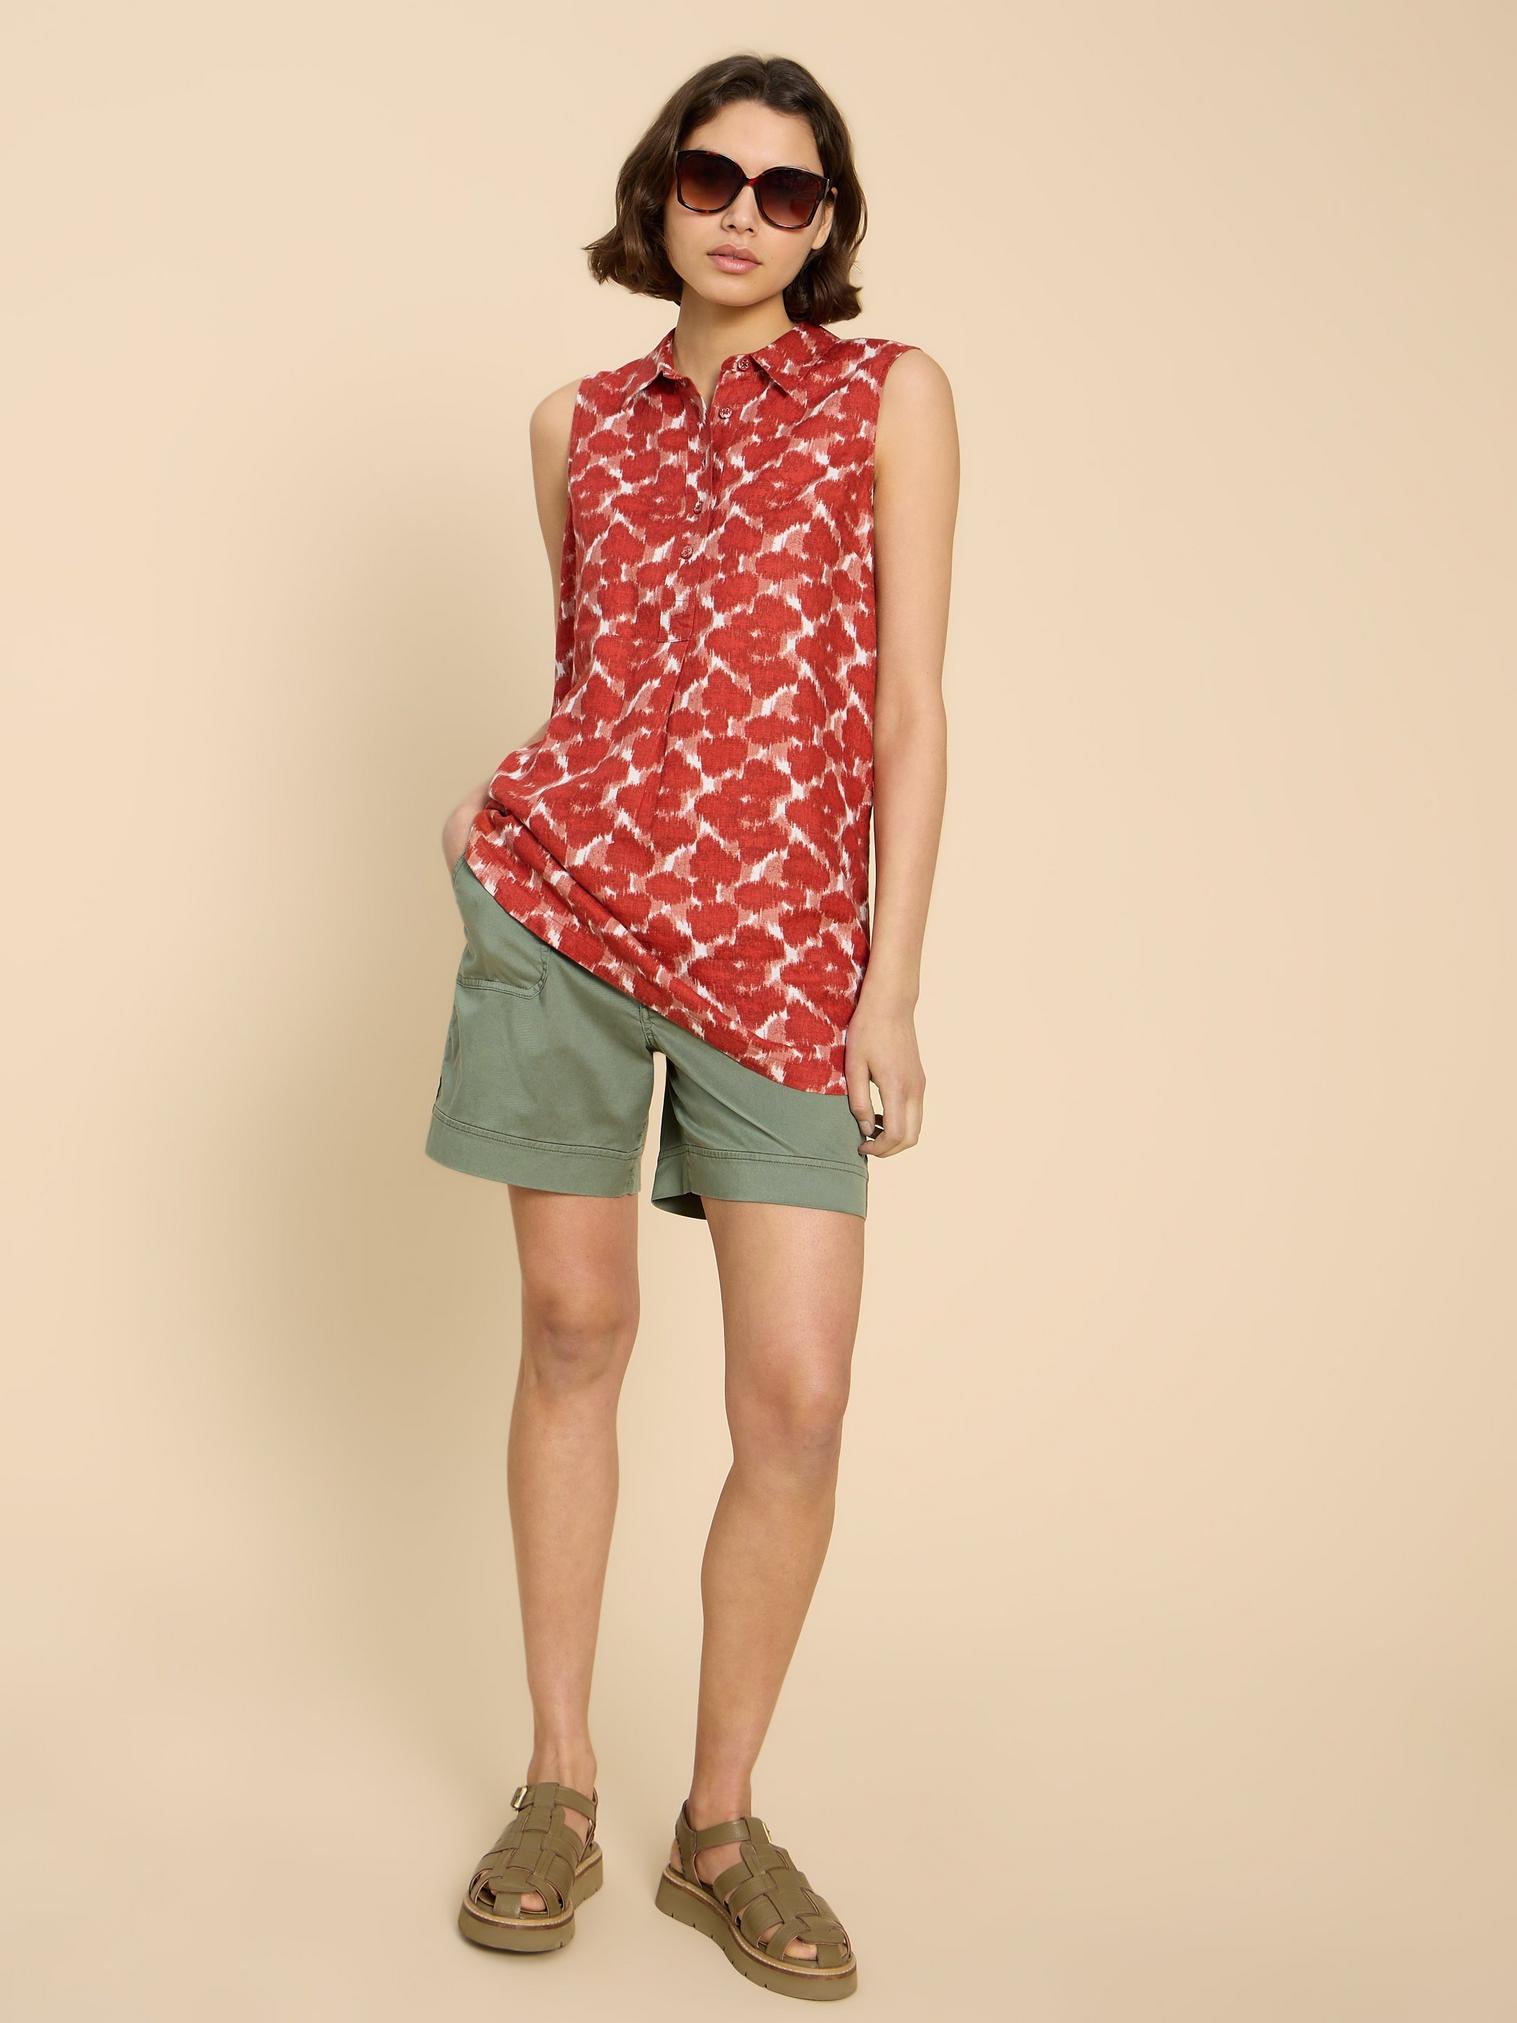 Evelyn Sleeveless Linen Tunic in RED PR - LIFESTYLE